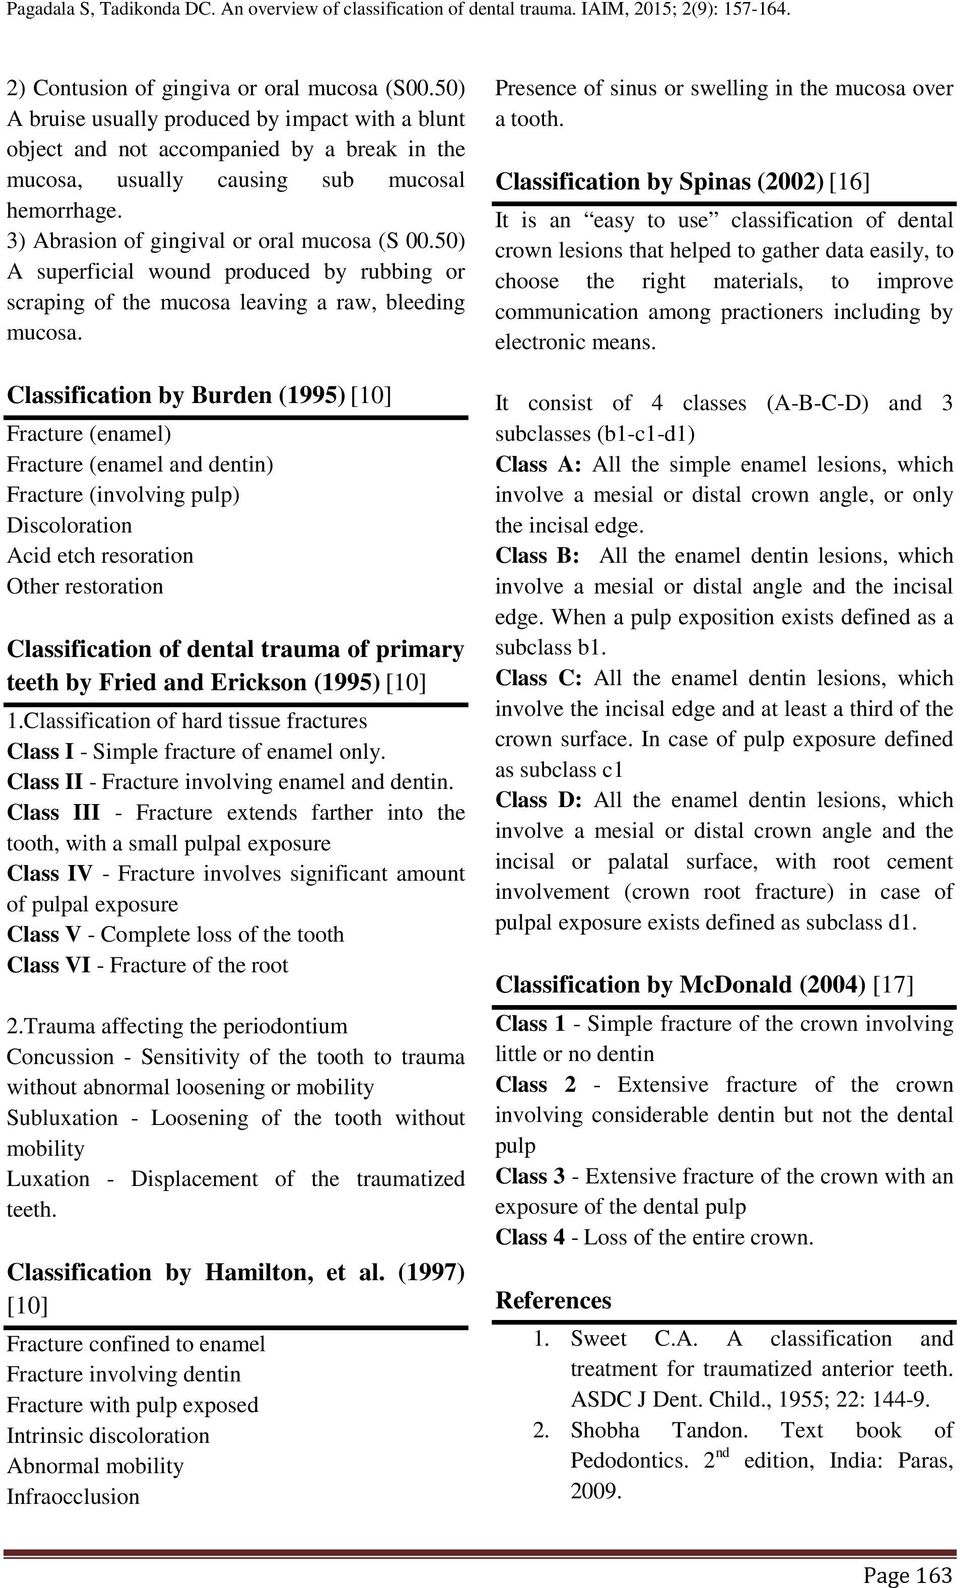 Classification by Burden (1995) [10] Fracture (enamel) Fracture (enamel and dentin) Fracture (involving pulp) Discoloration Acid etch resoration Other restoration Classification of dental trauma of